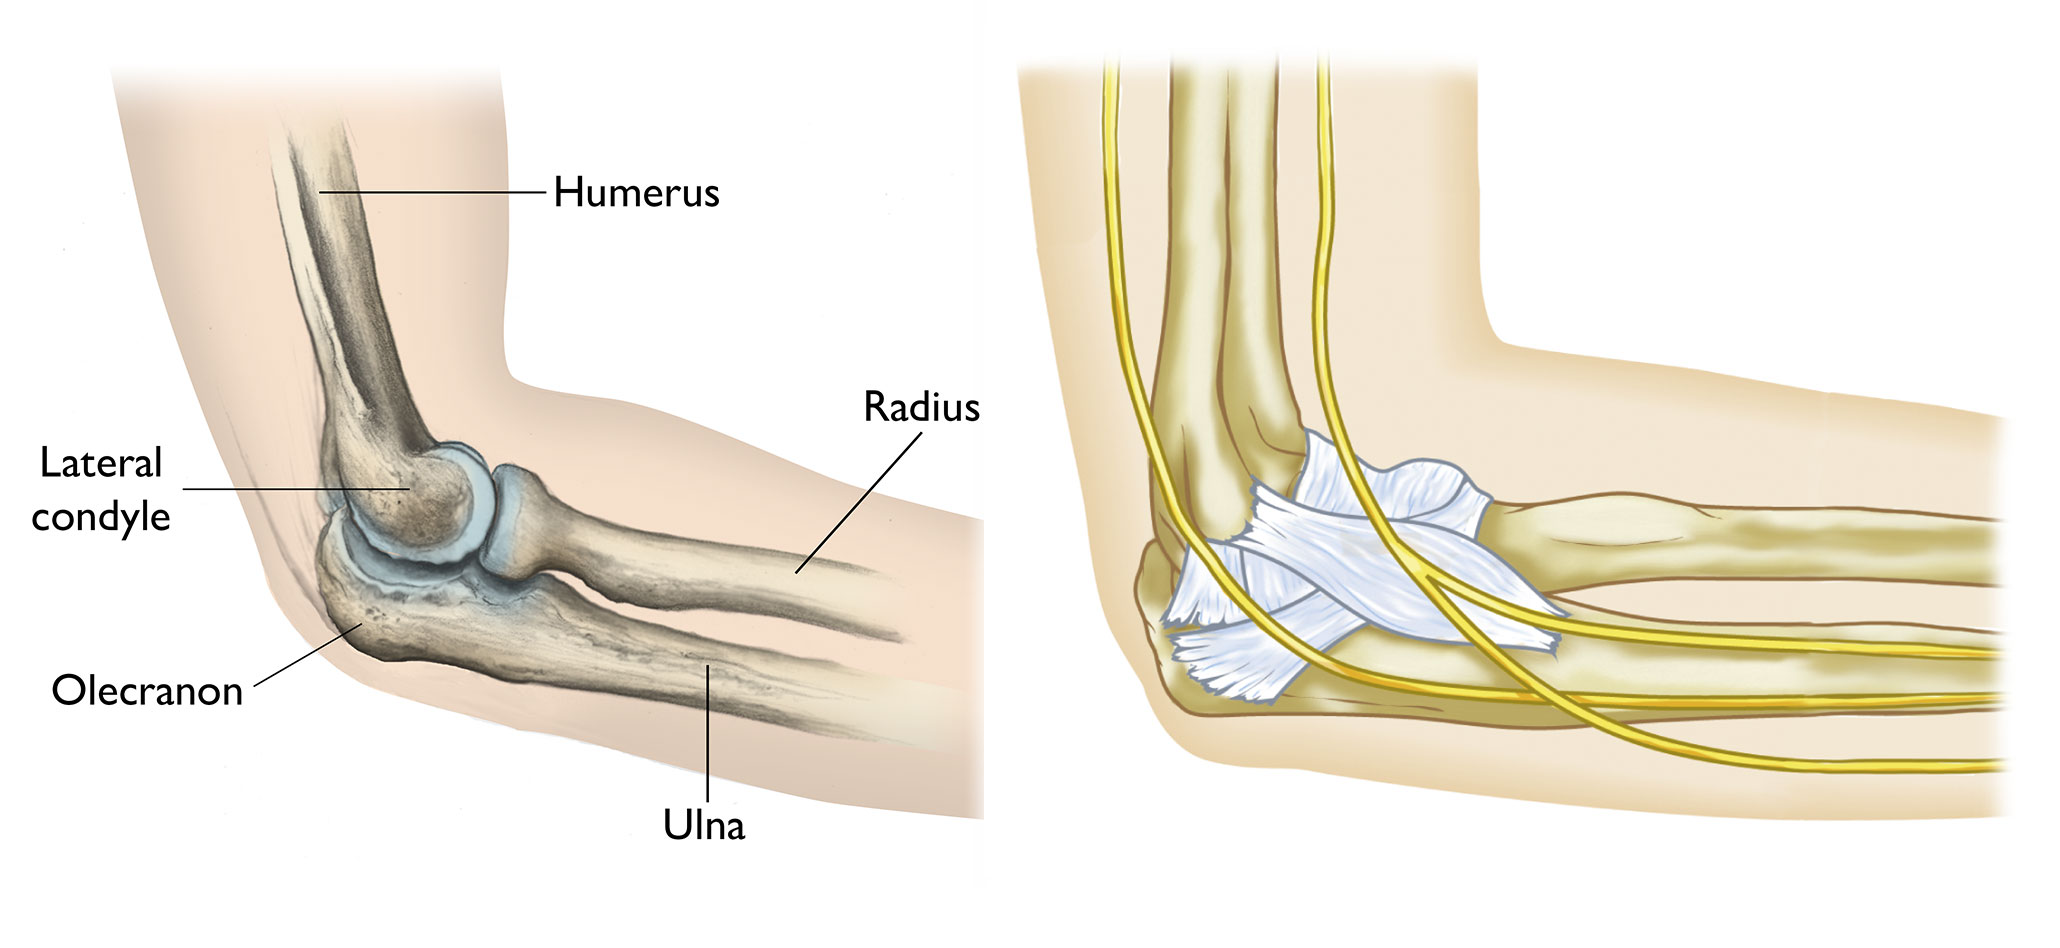 Anatomy of the elbow, including the nerves and ligaments